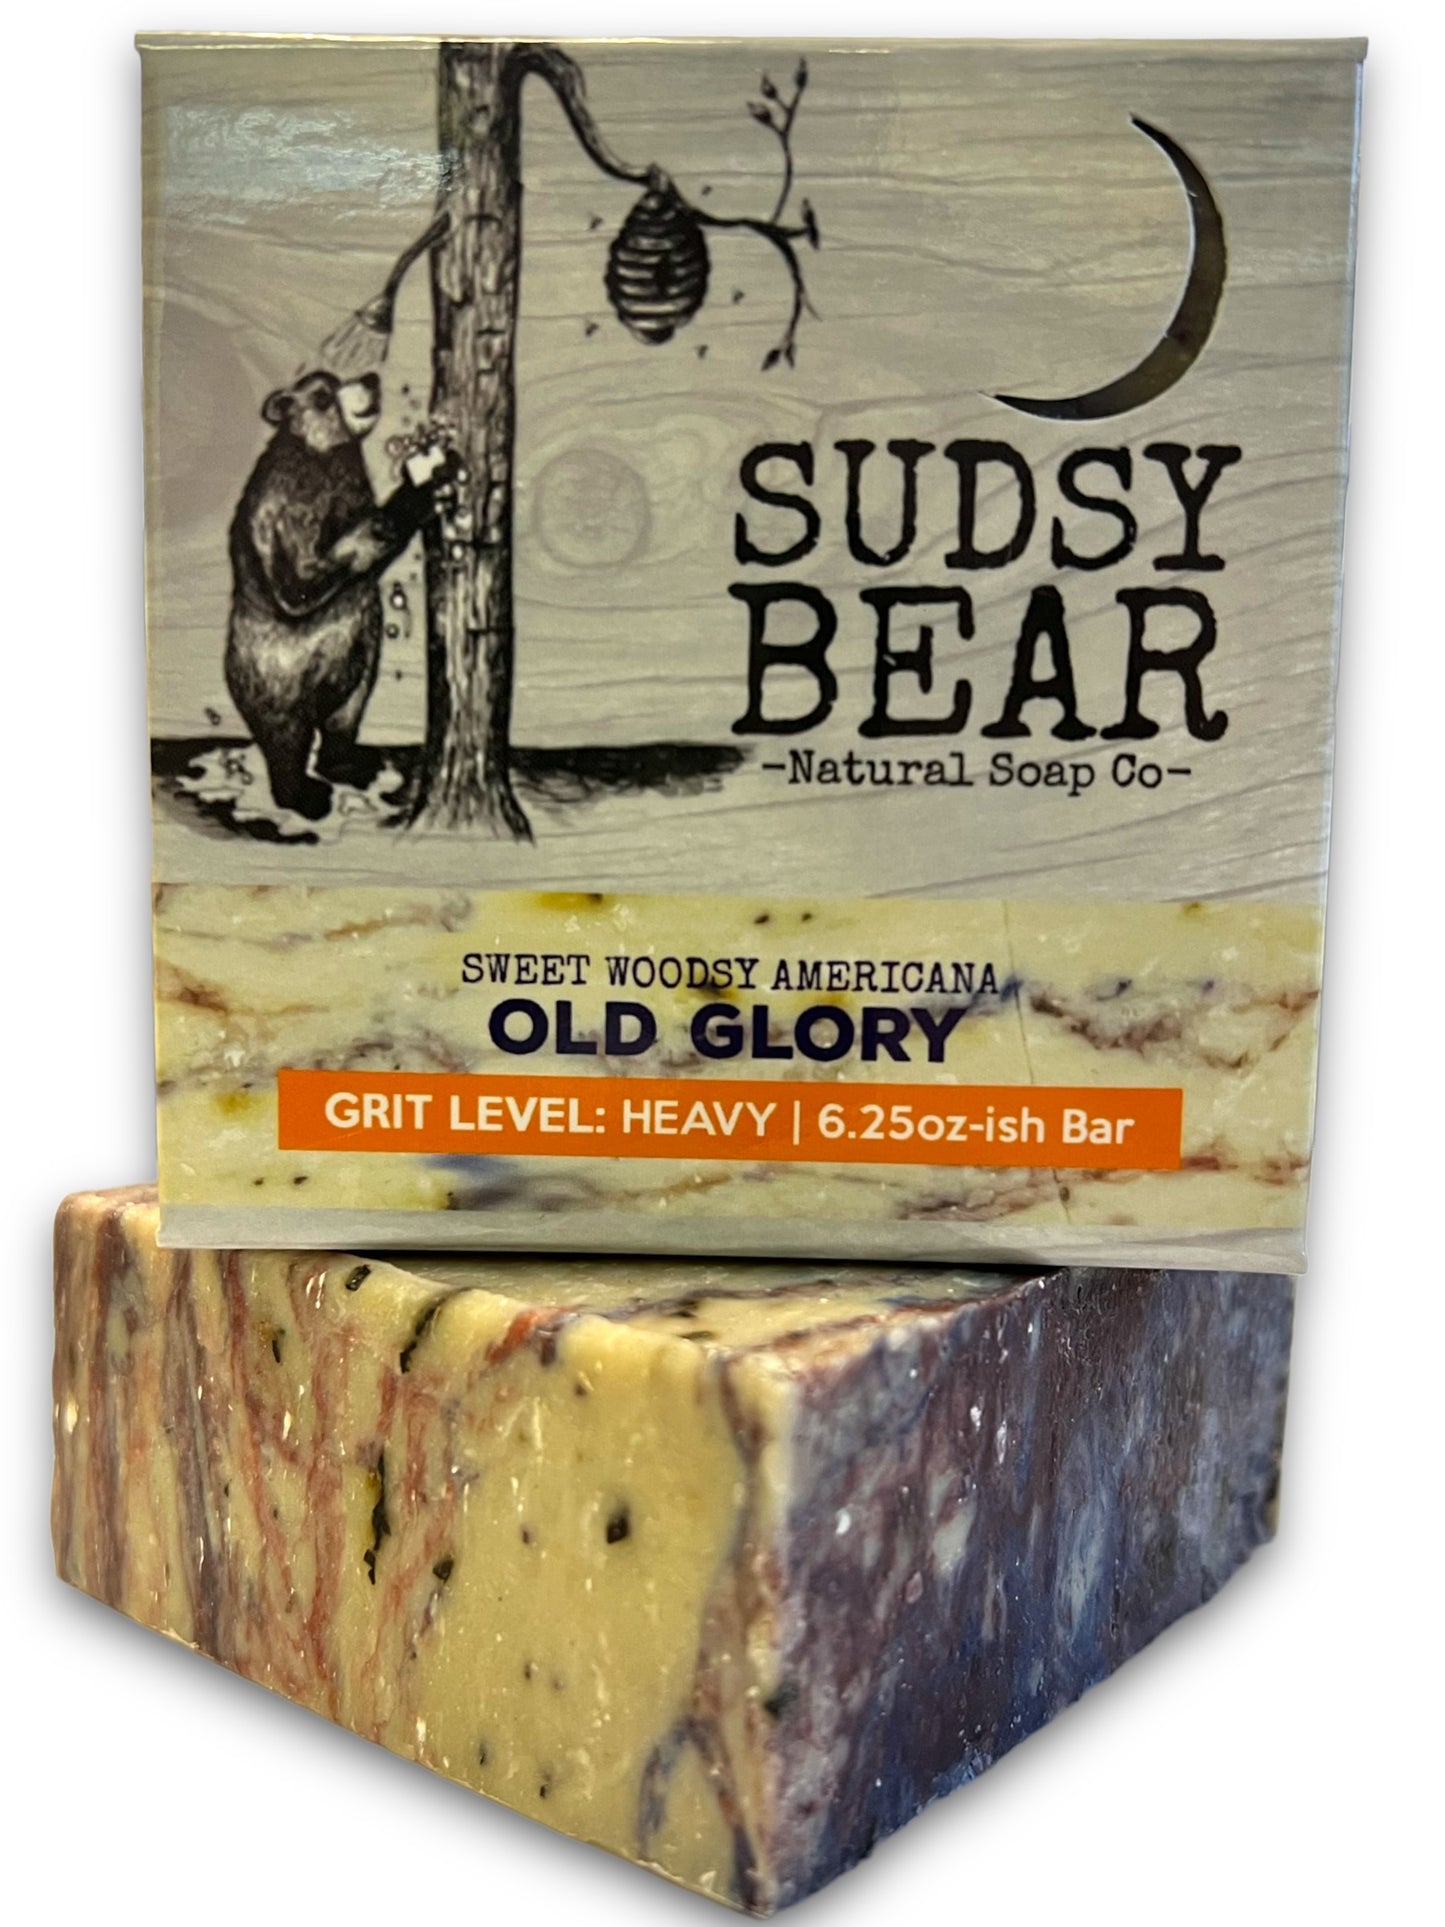 Sudsy Bear's Old Forest Pine Tar VS Dr. Squatch's Pine Tar 